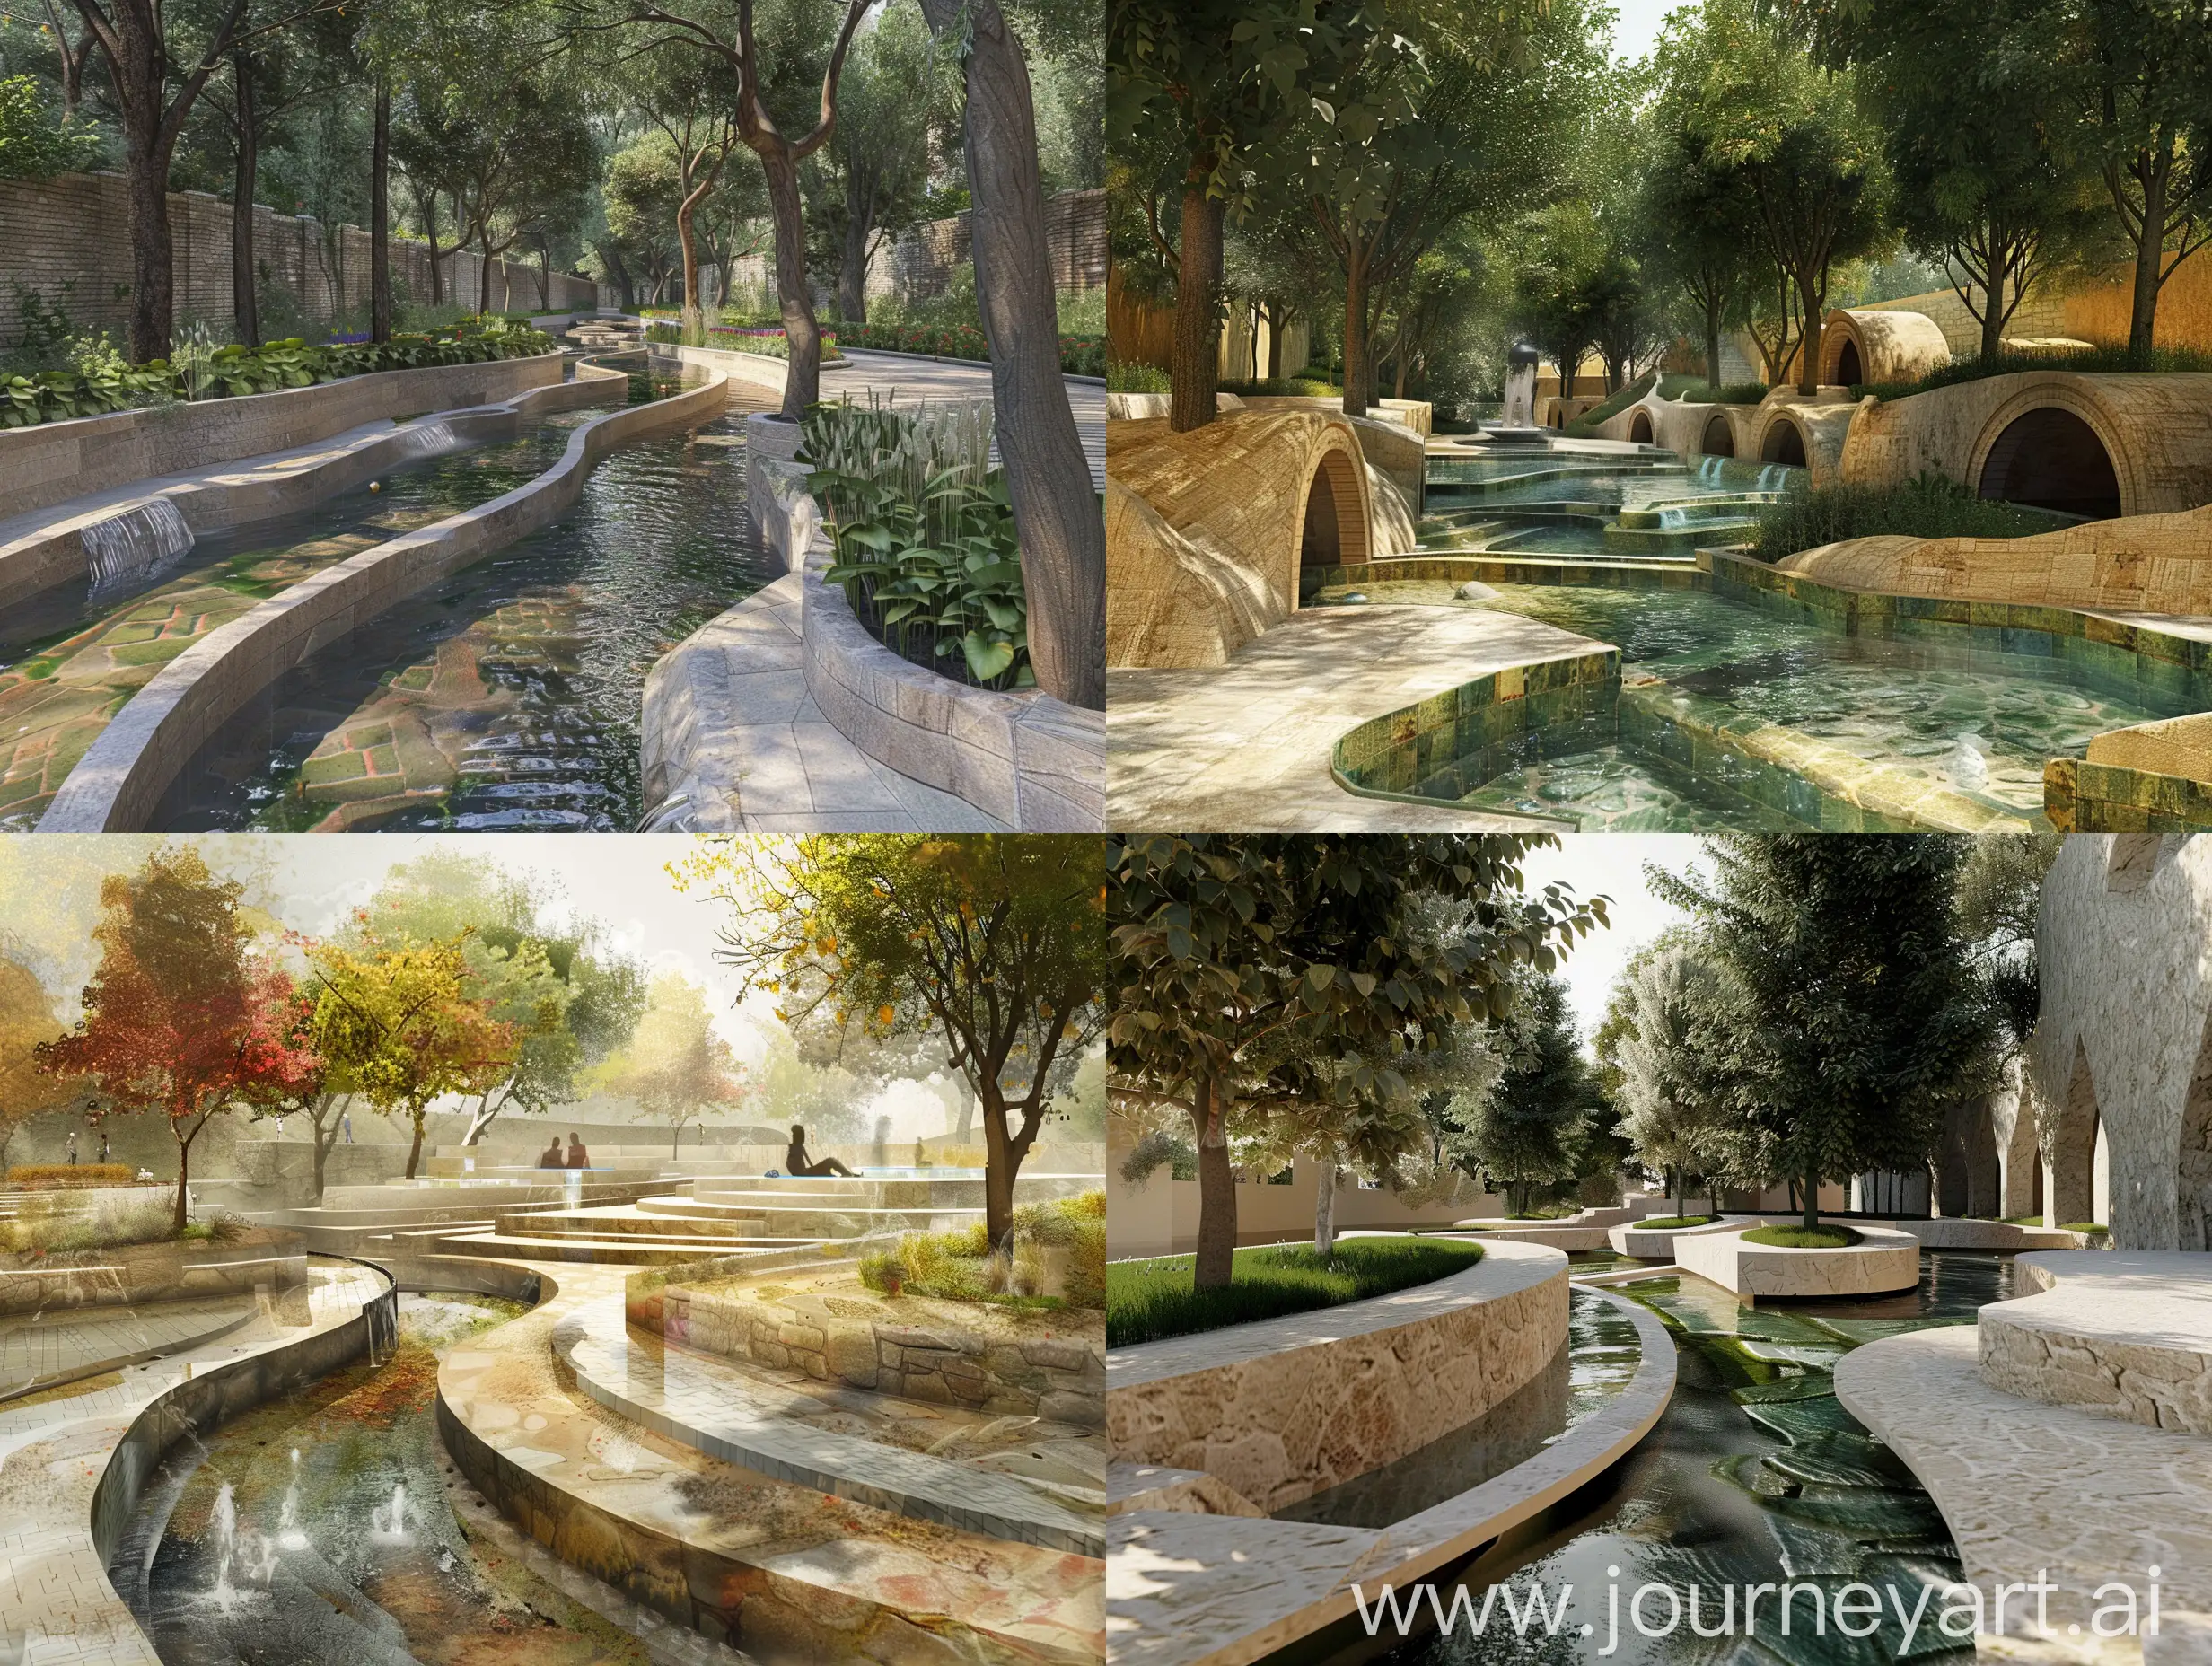 Interactive-QanatInspired-Urban-Park-with-Educational-Water-Channels